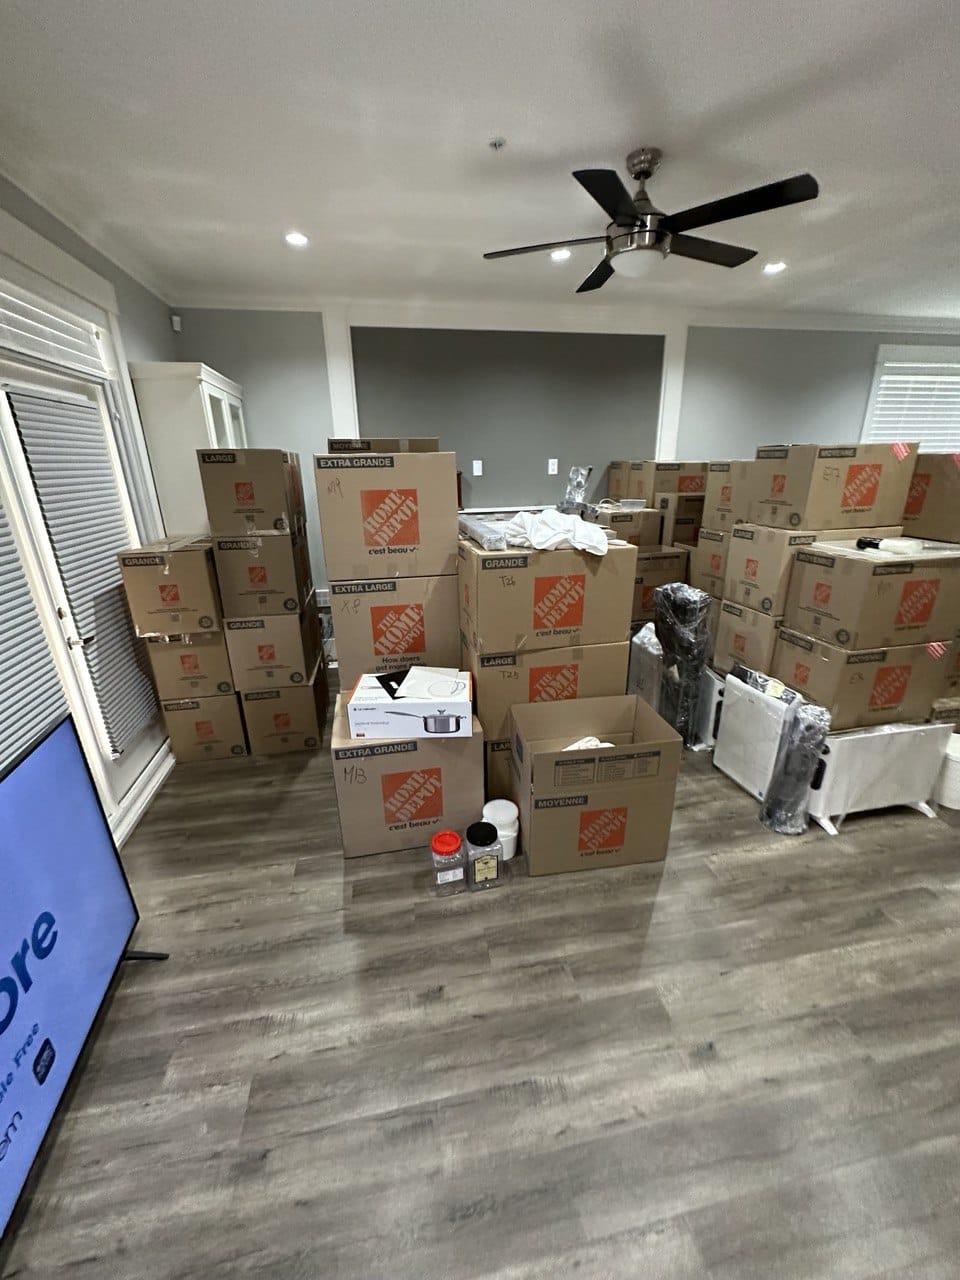 Hiring Movers vs. Moving Yourself: Cost, Convenience, and Considerations